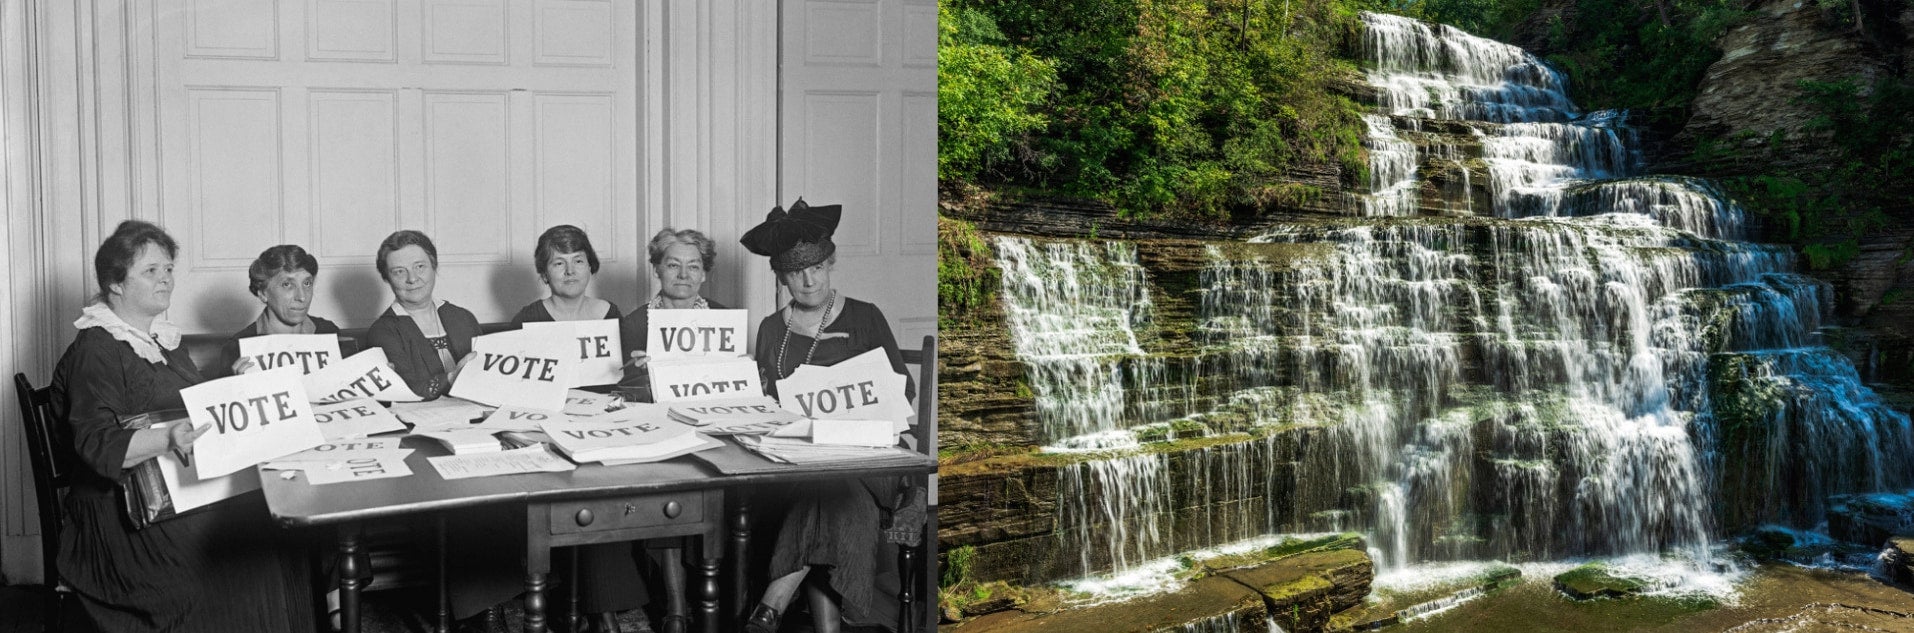 (left) historical image of suffragettes holding signs displaying the word vote (right) water cascades down green mossy rocks